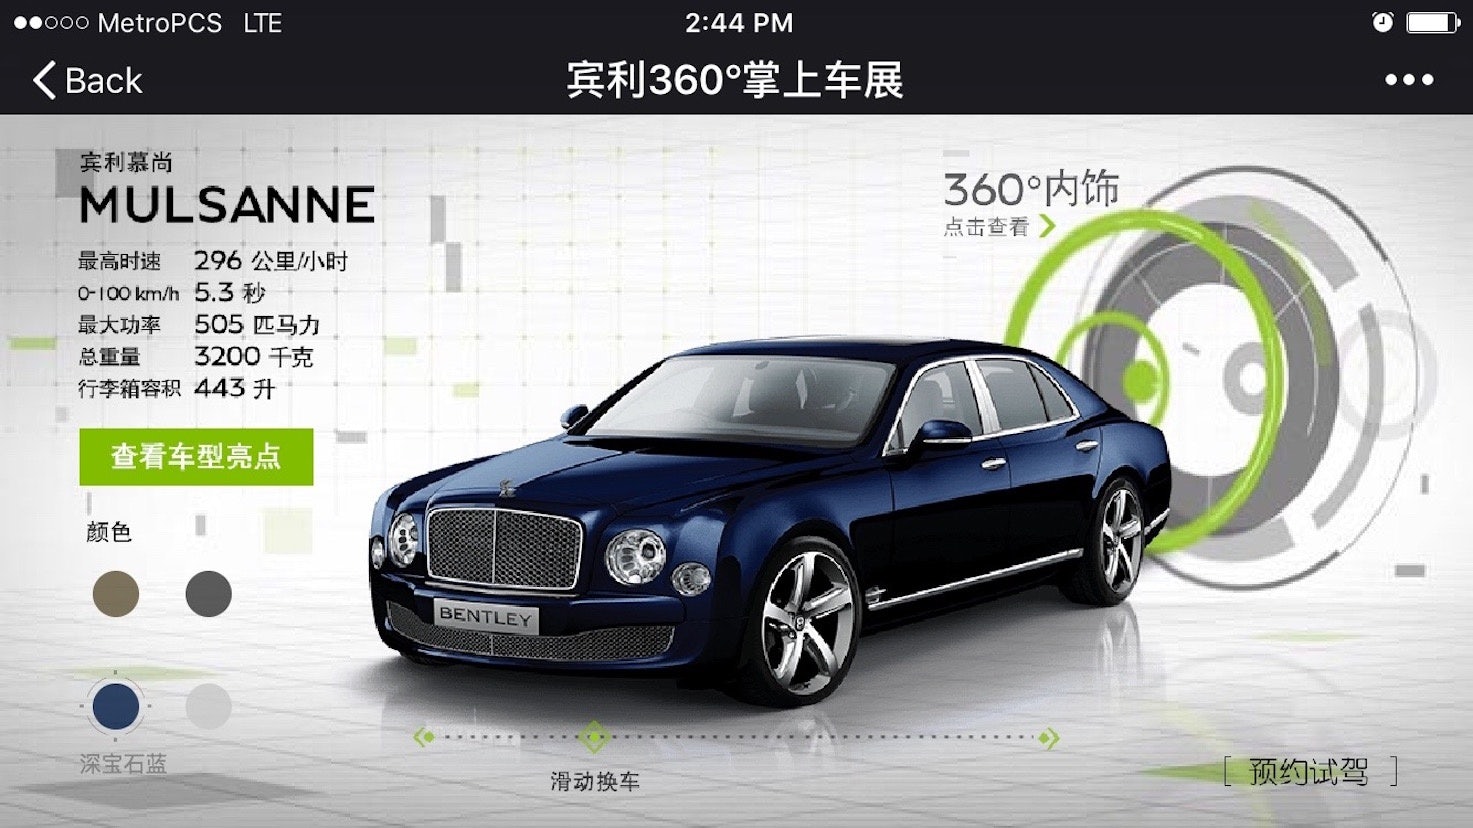 An interactive ad on WeChat for Bentley, which uses data to reach targeted customer segments. 